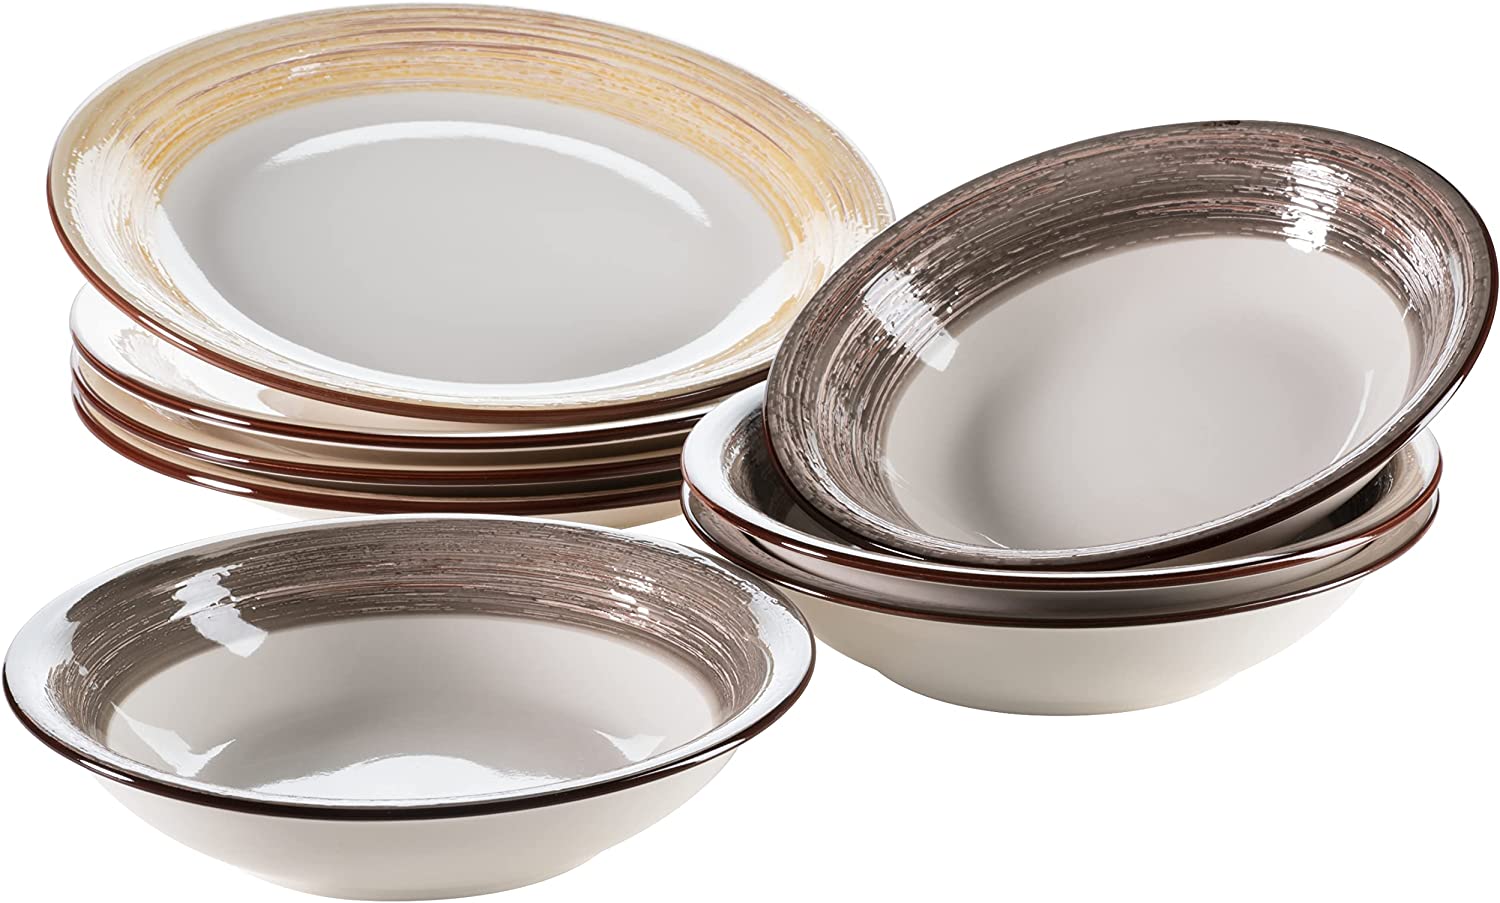 Maser Mäser 931374 Duole Series Plate Set for 4 People, 8-Piece Vintage Dinner Service with Dinner Plate and Soup Plate in Shabby Chic Design, Ceramic, Beige / Brown